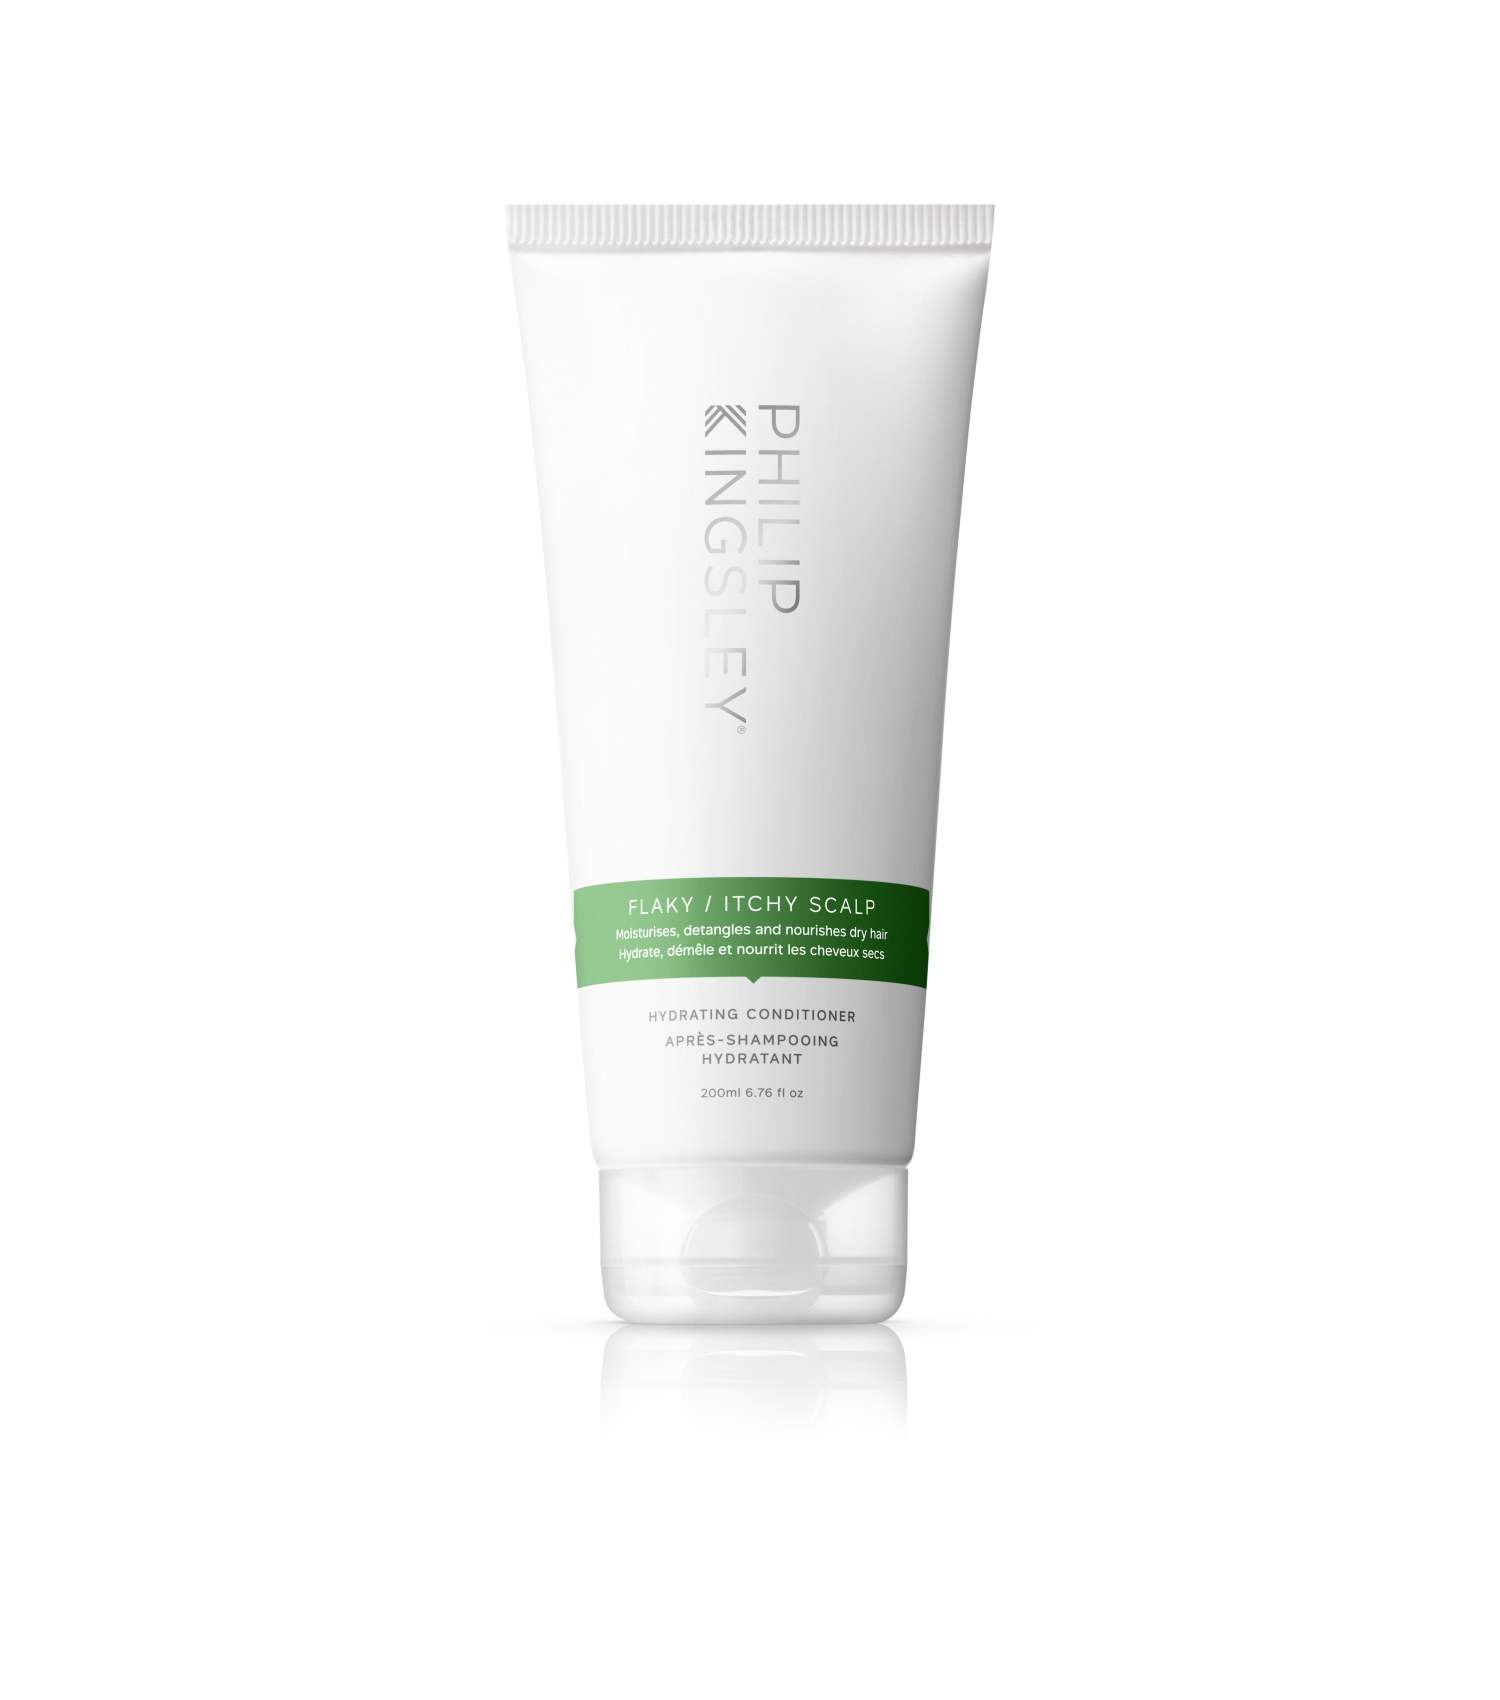 Philip Kingsley Flaky/Itchy Scalp Hydrating Conditioner  1